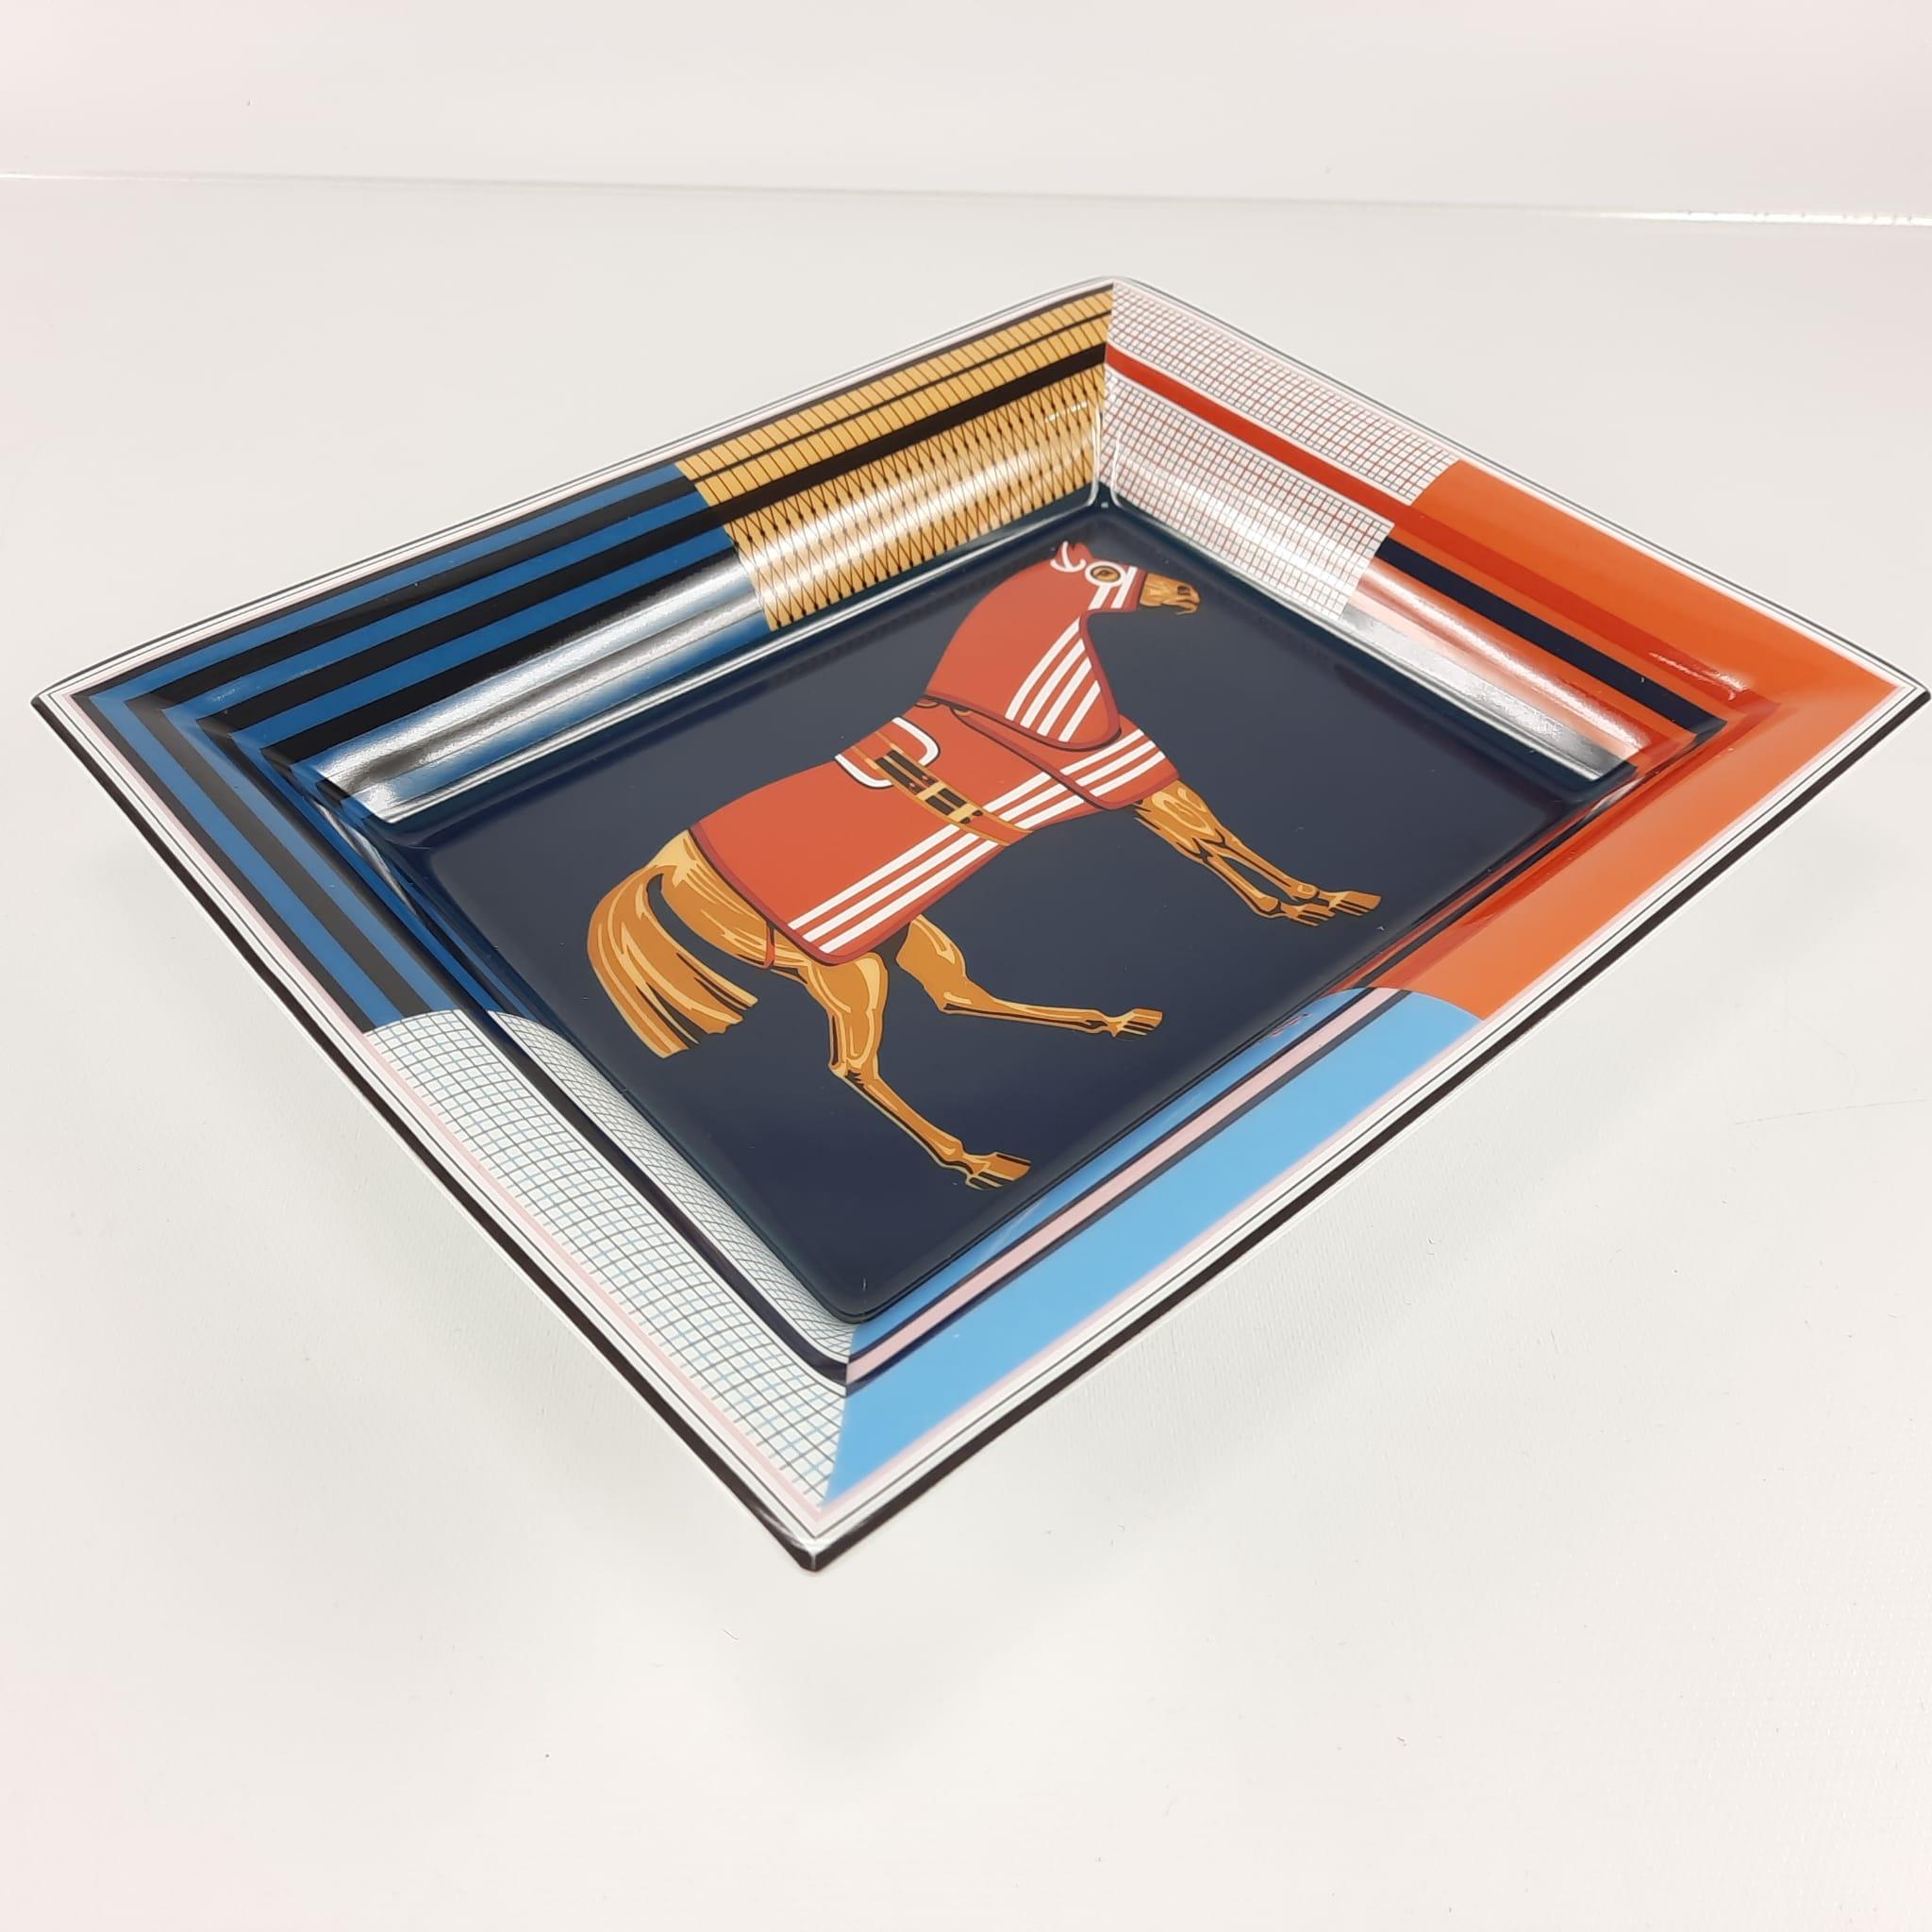 Change tray in porcelain
- Velvet goatskin base
- Decorated using chromolithography
Dimensions: L 21 x W 17 cm